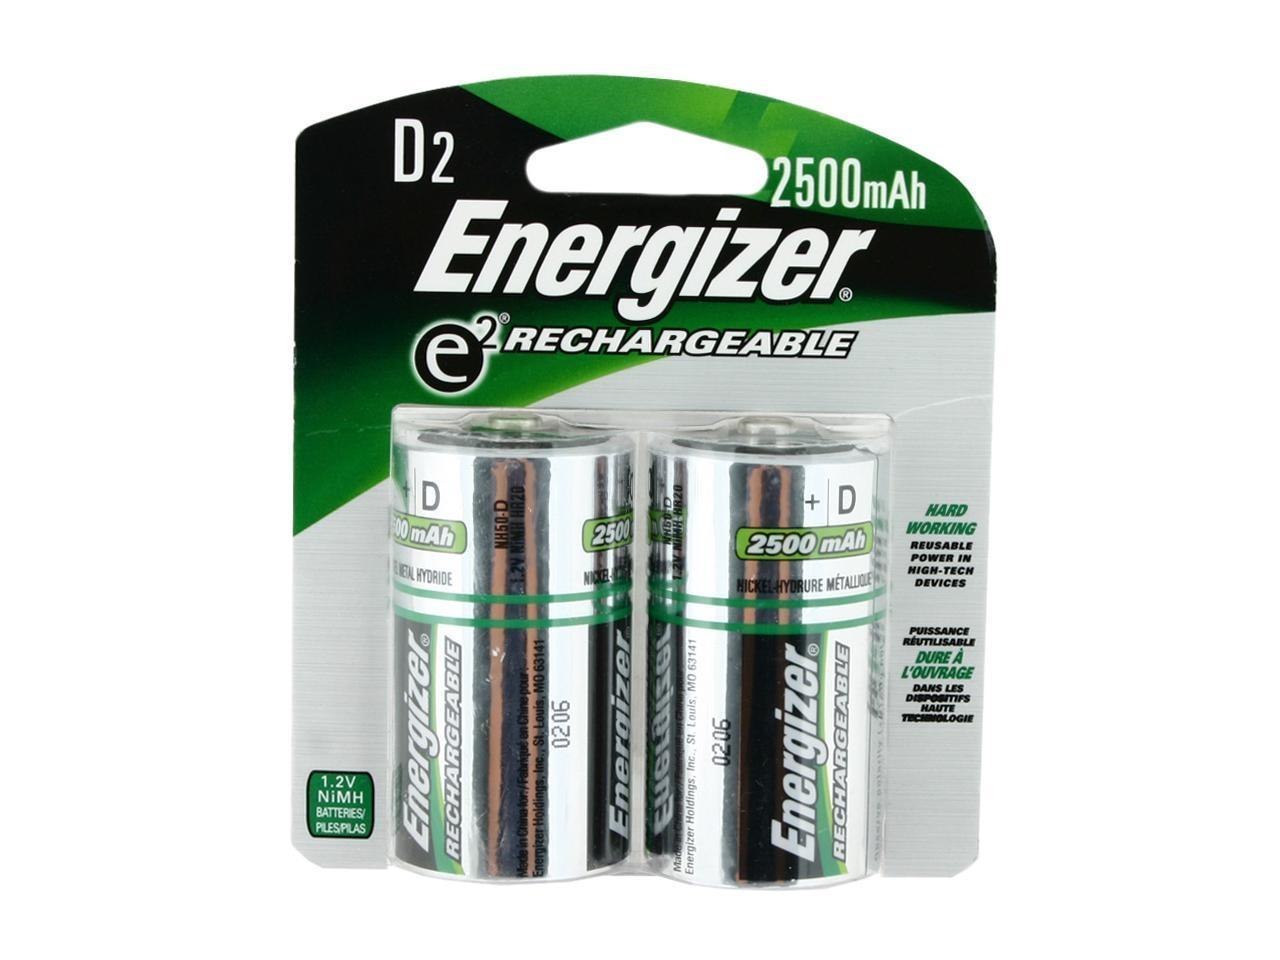 Energizer Nickel Metal hydride Rechargeable Battery